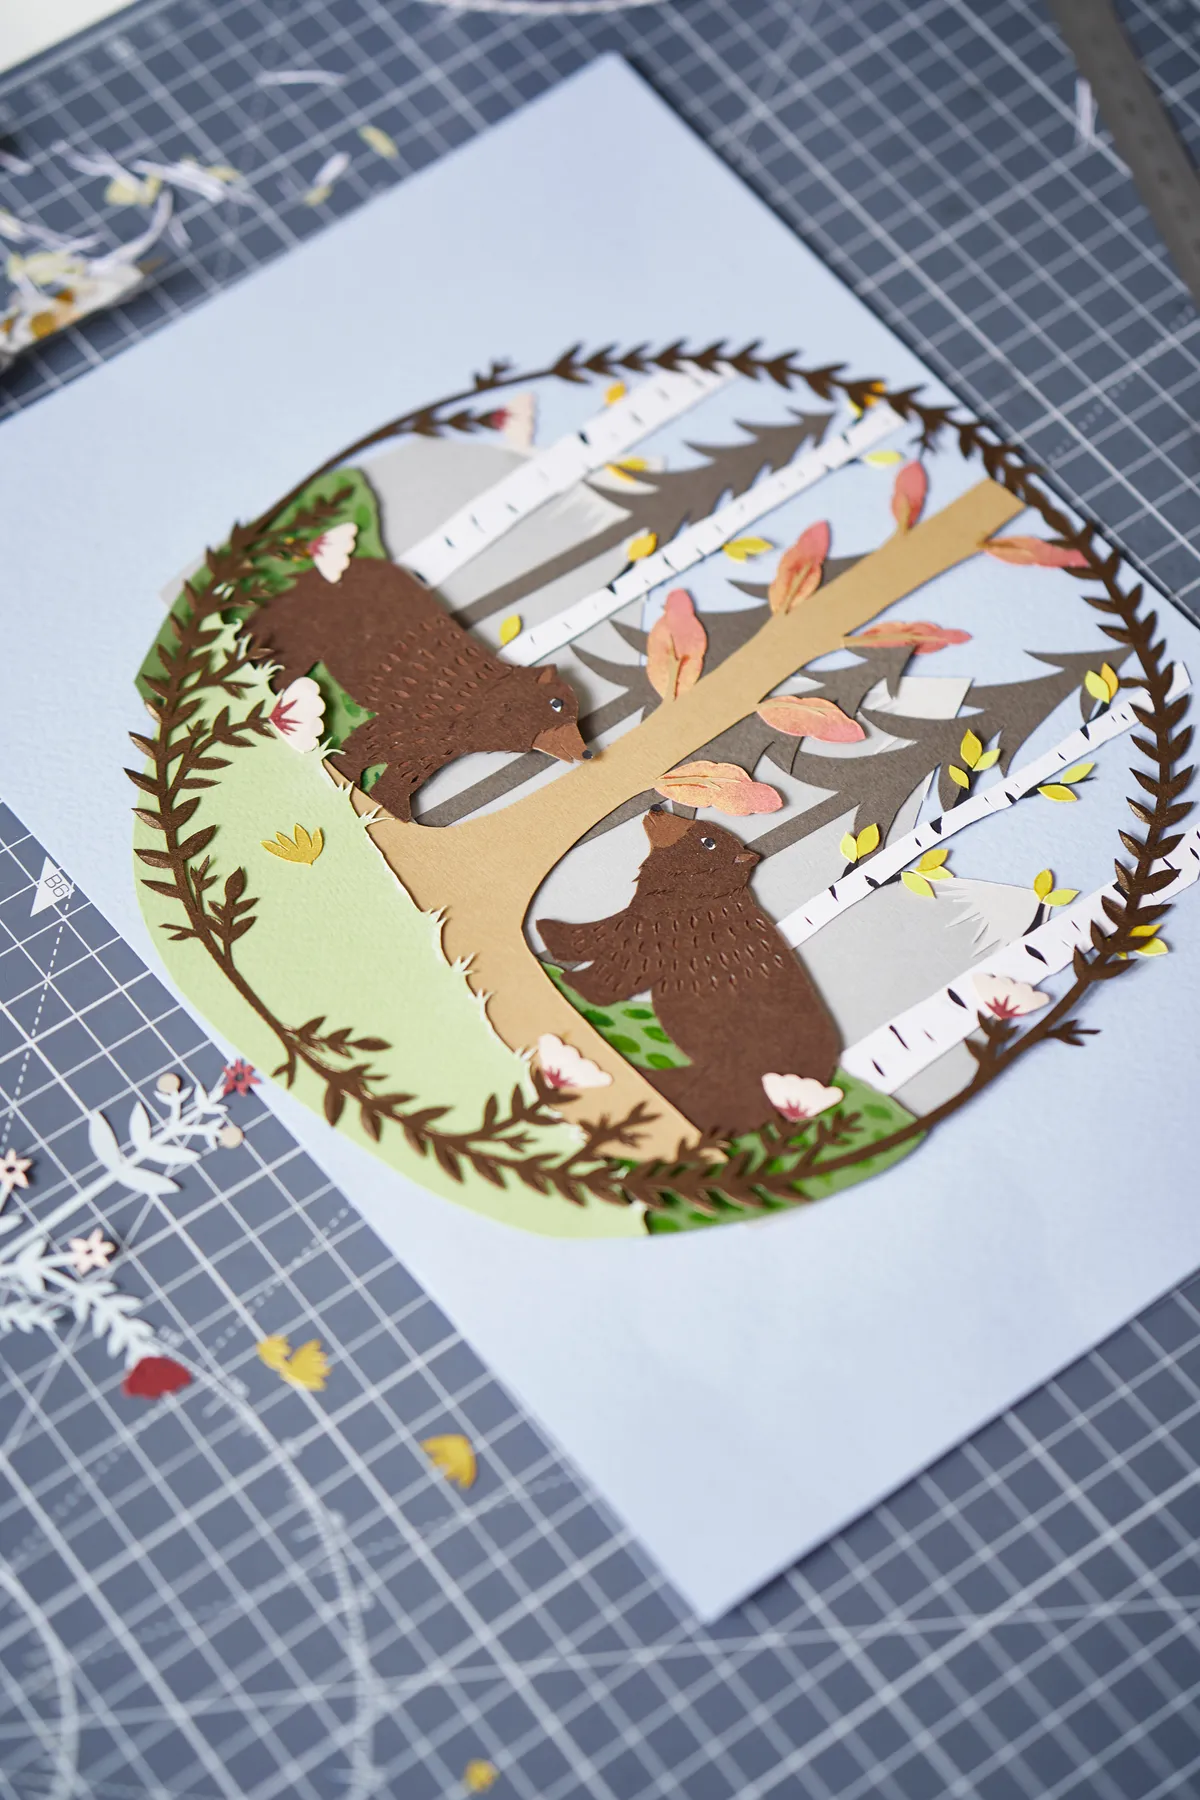 One of Jessica's paper cut designs featuring bears in a woodland scene